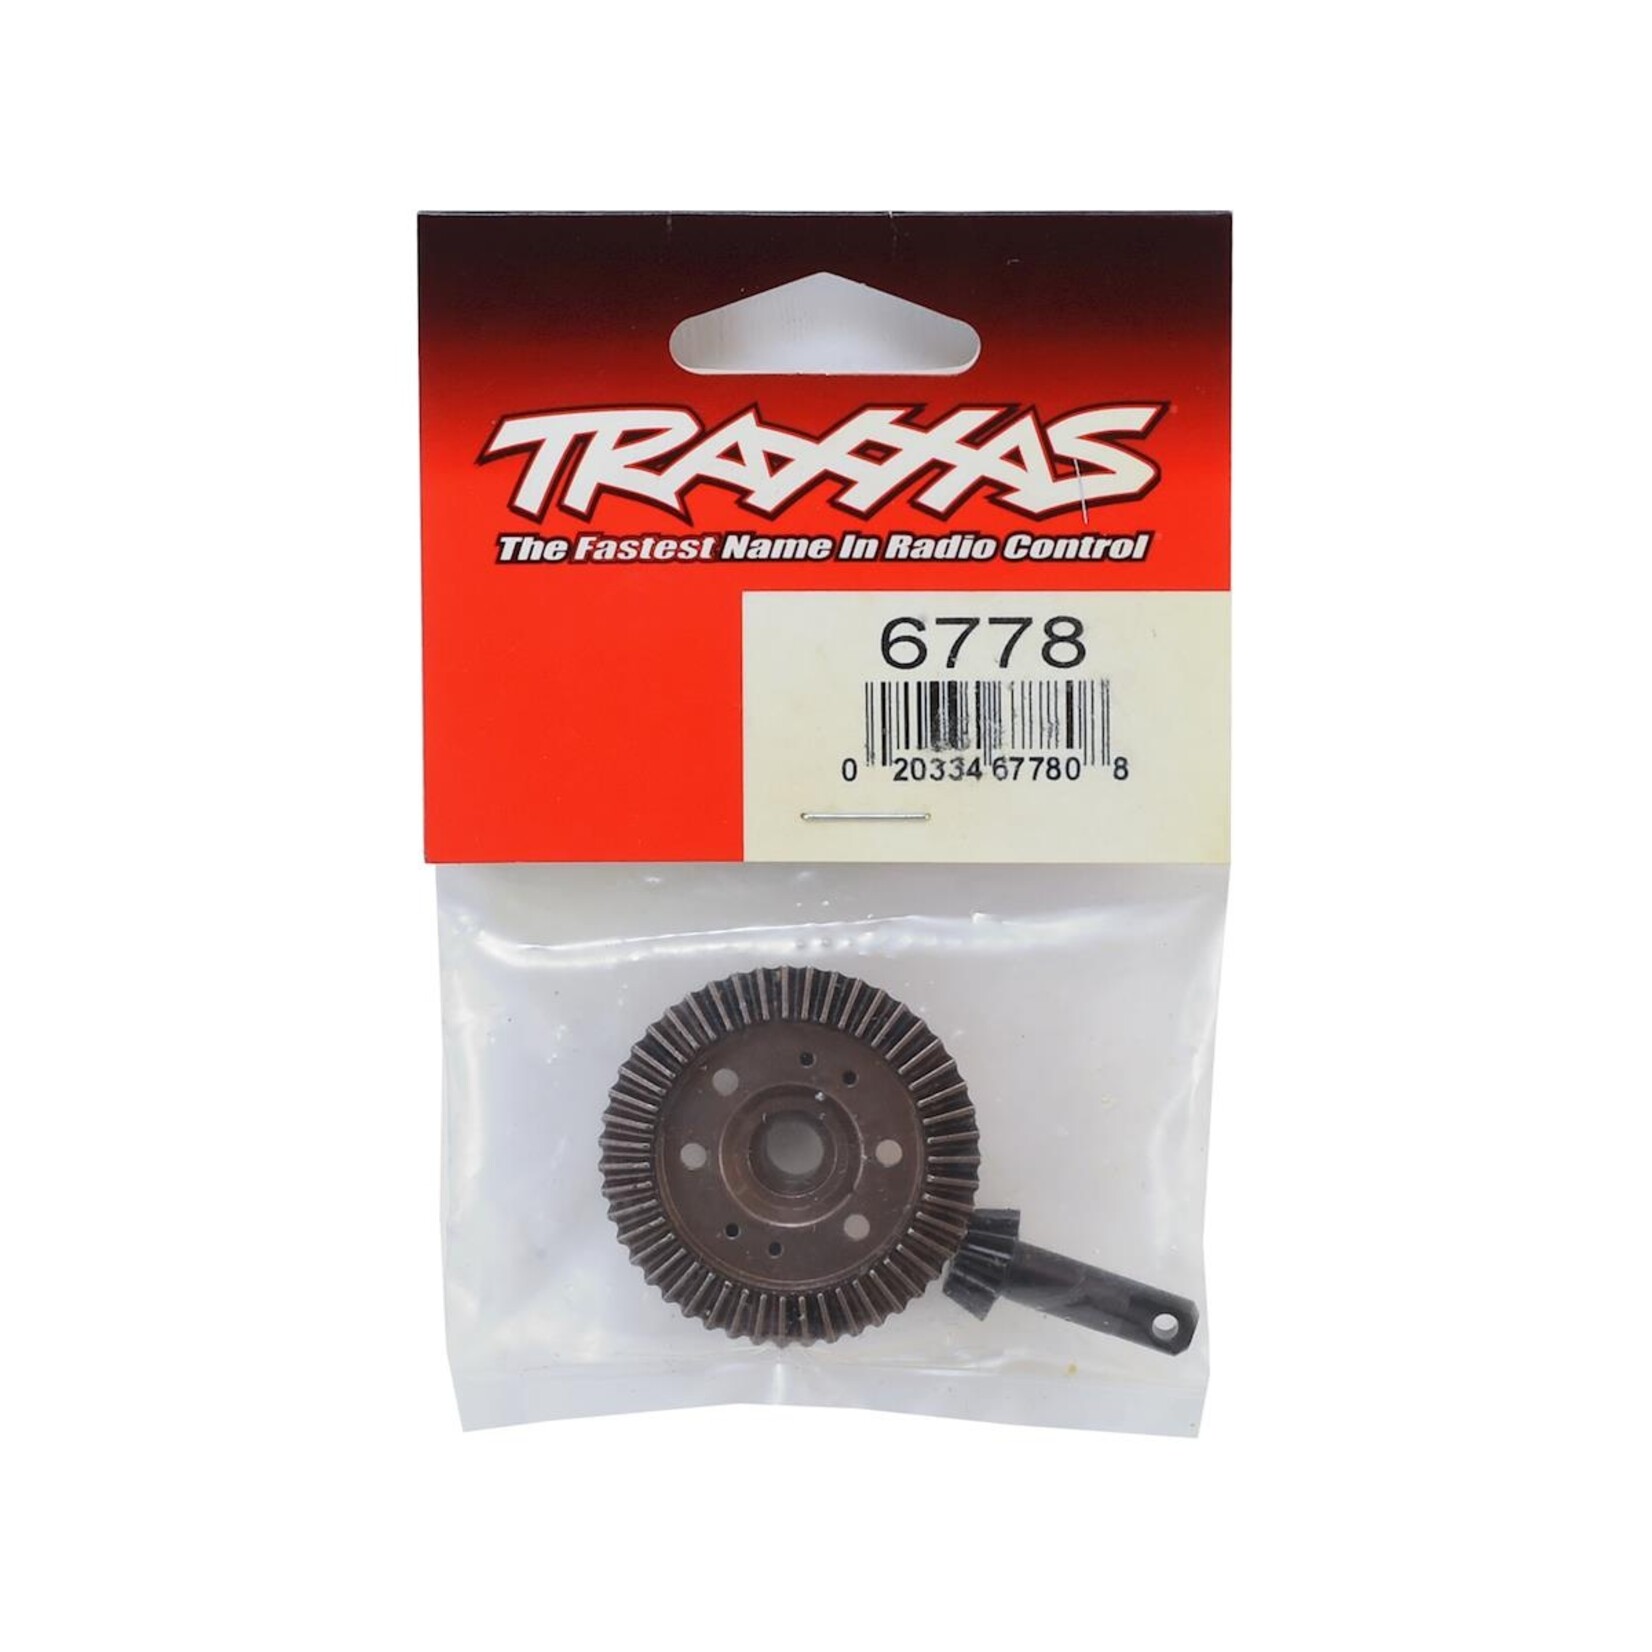 Traxxas Traxxas Stampede 4x4 Front Ring & Pinion Gear #6778